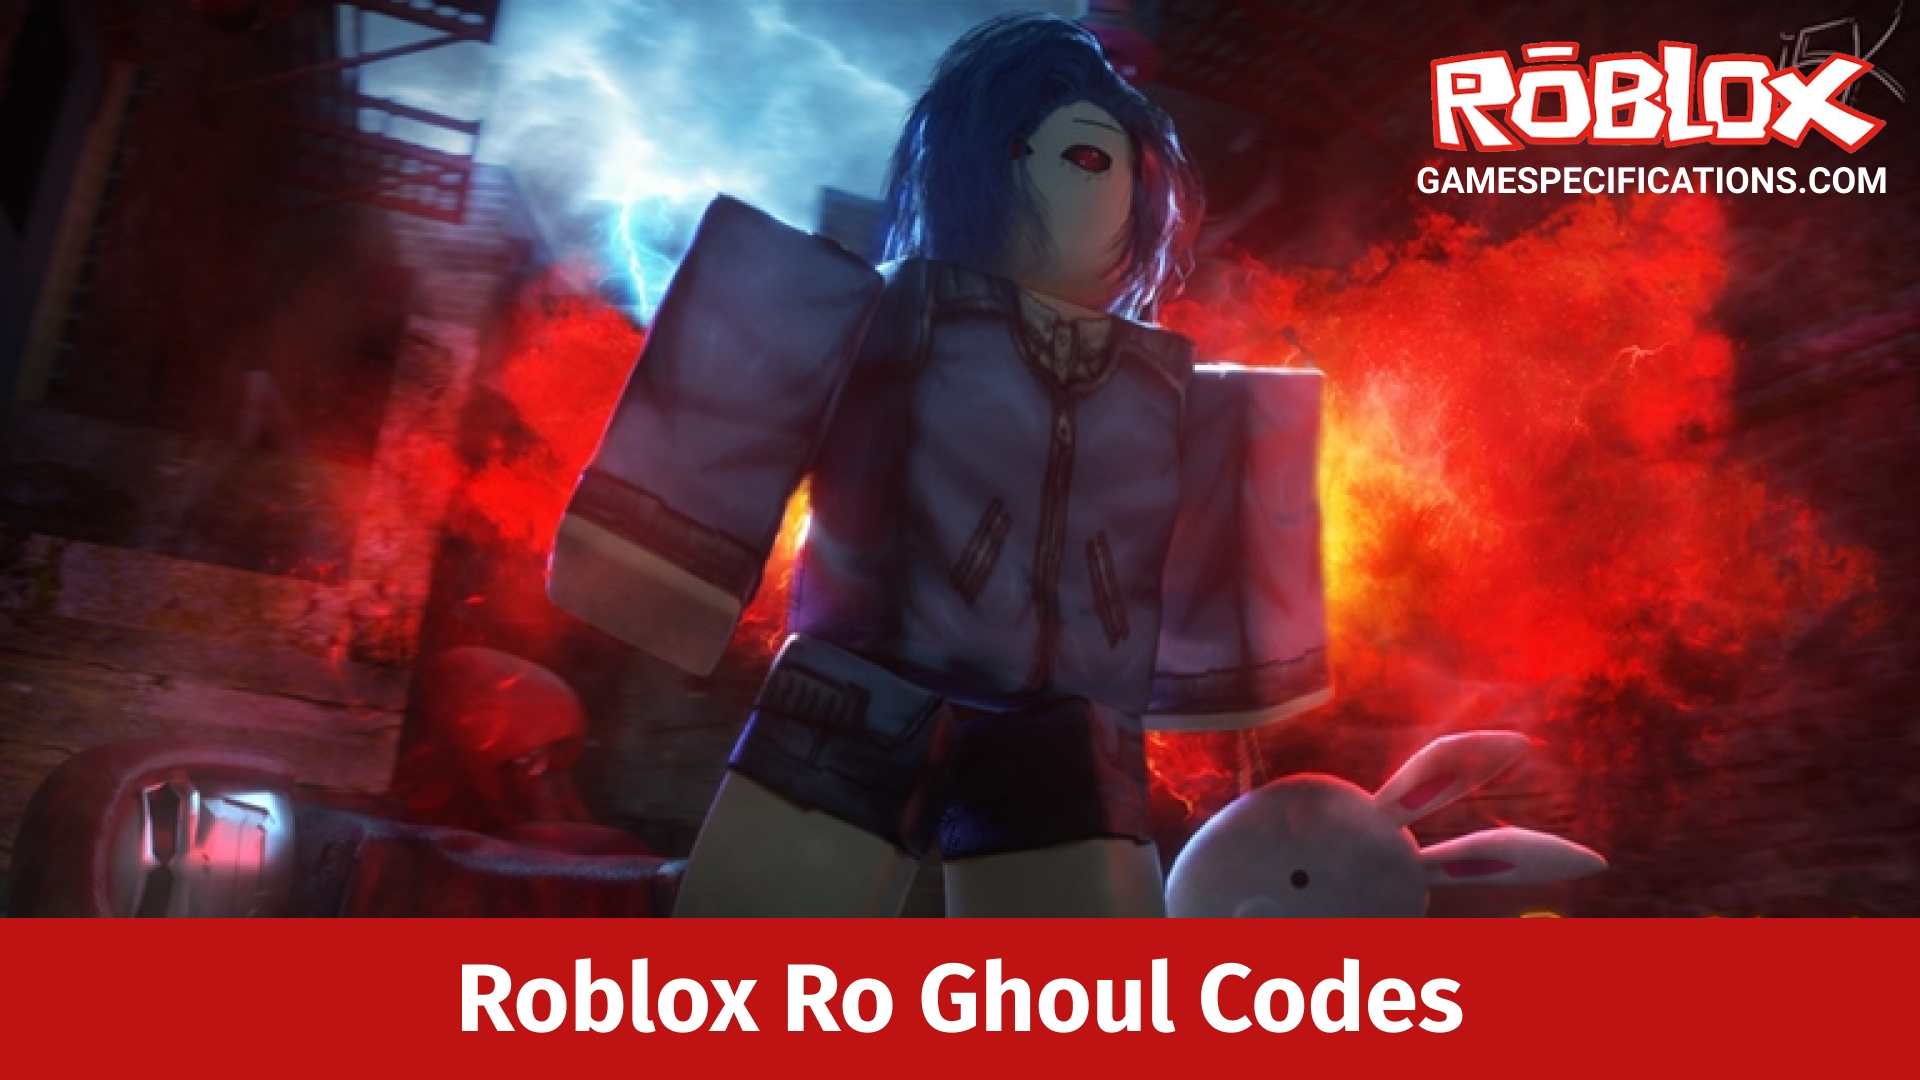 Roblox Ro Ghoul Codes July 2021 Game Specifications - roblox codes ro